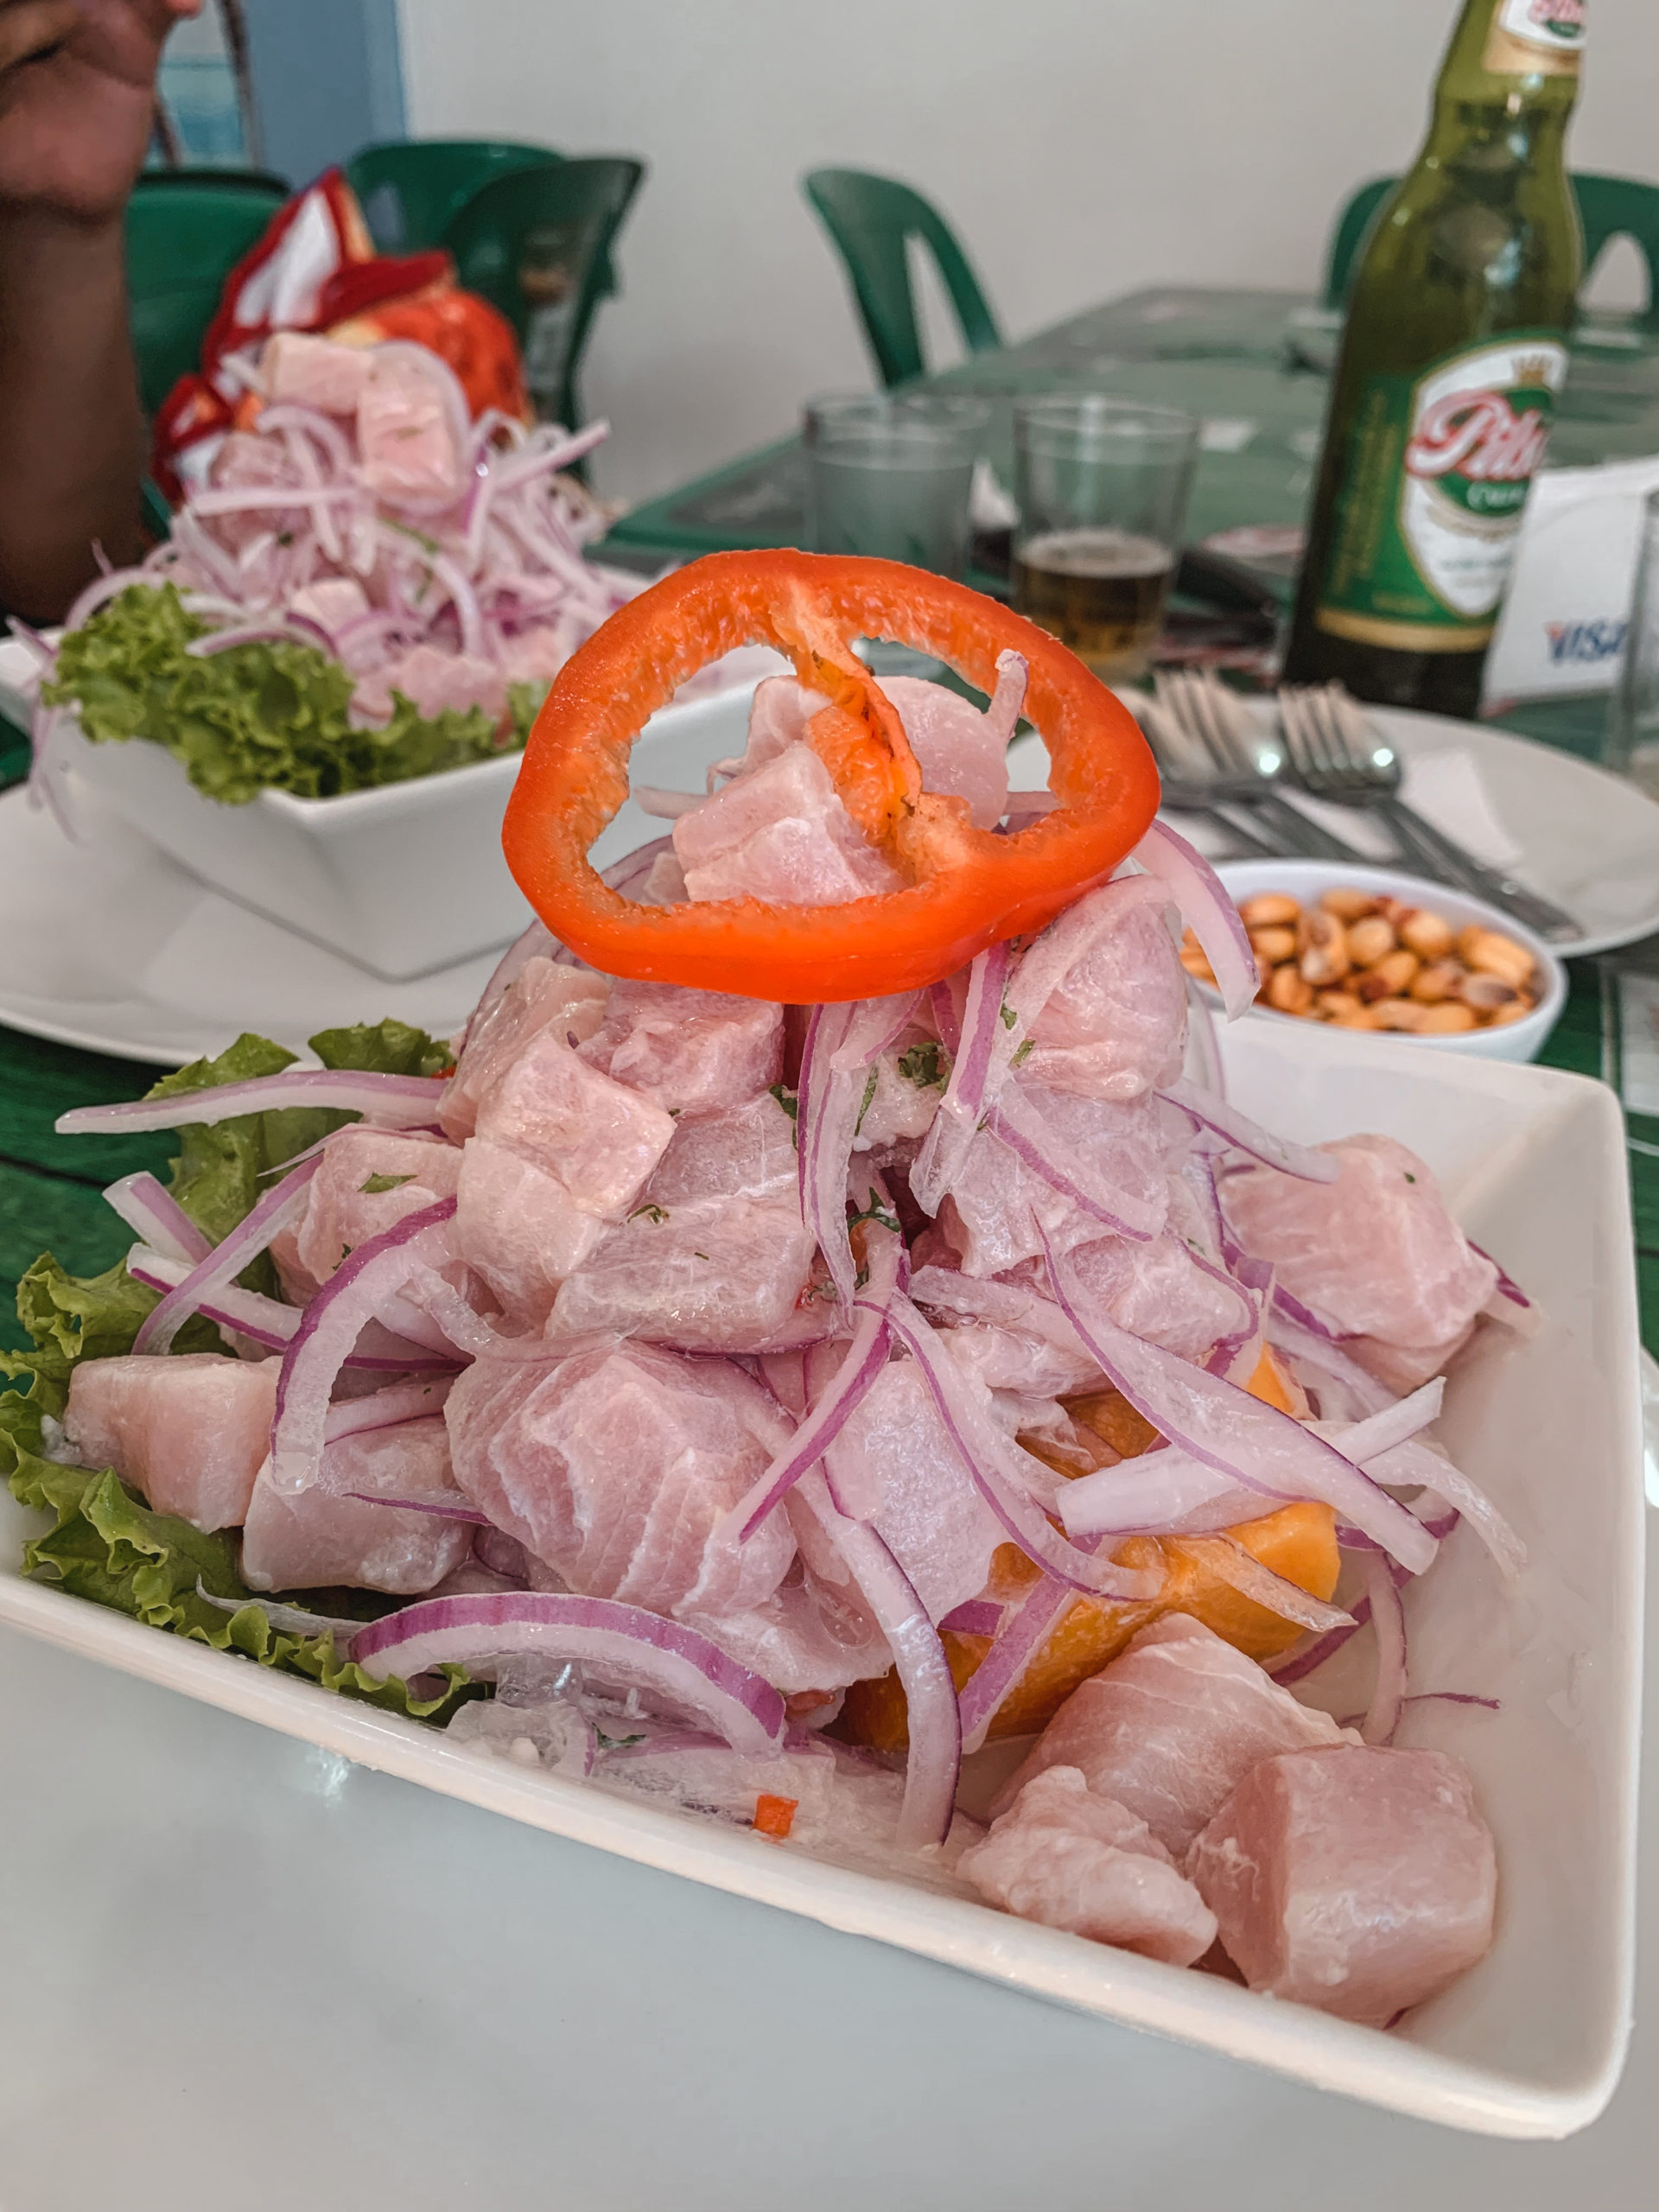 The Local’s Guide To The Best Ceviche In Lima | lifestyletraveler.co | IG: @lifestyletraveler.co